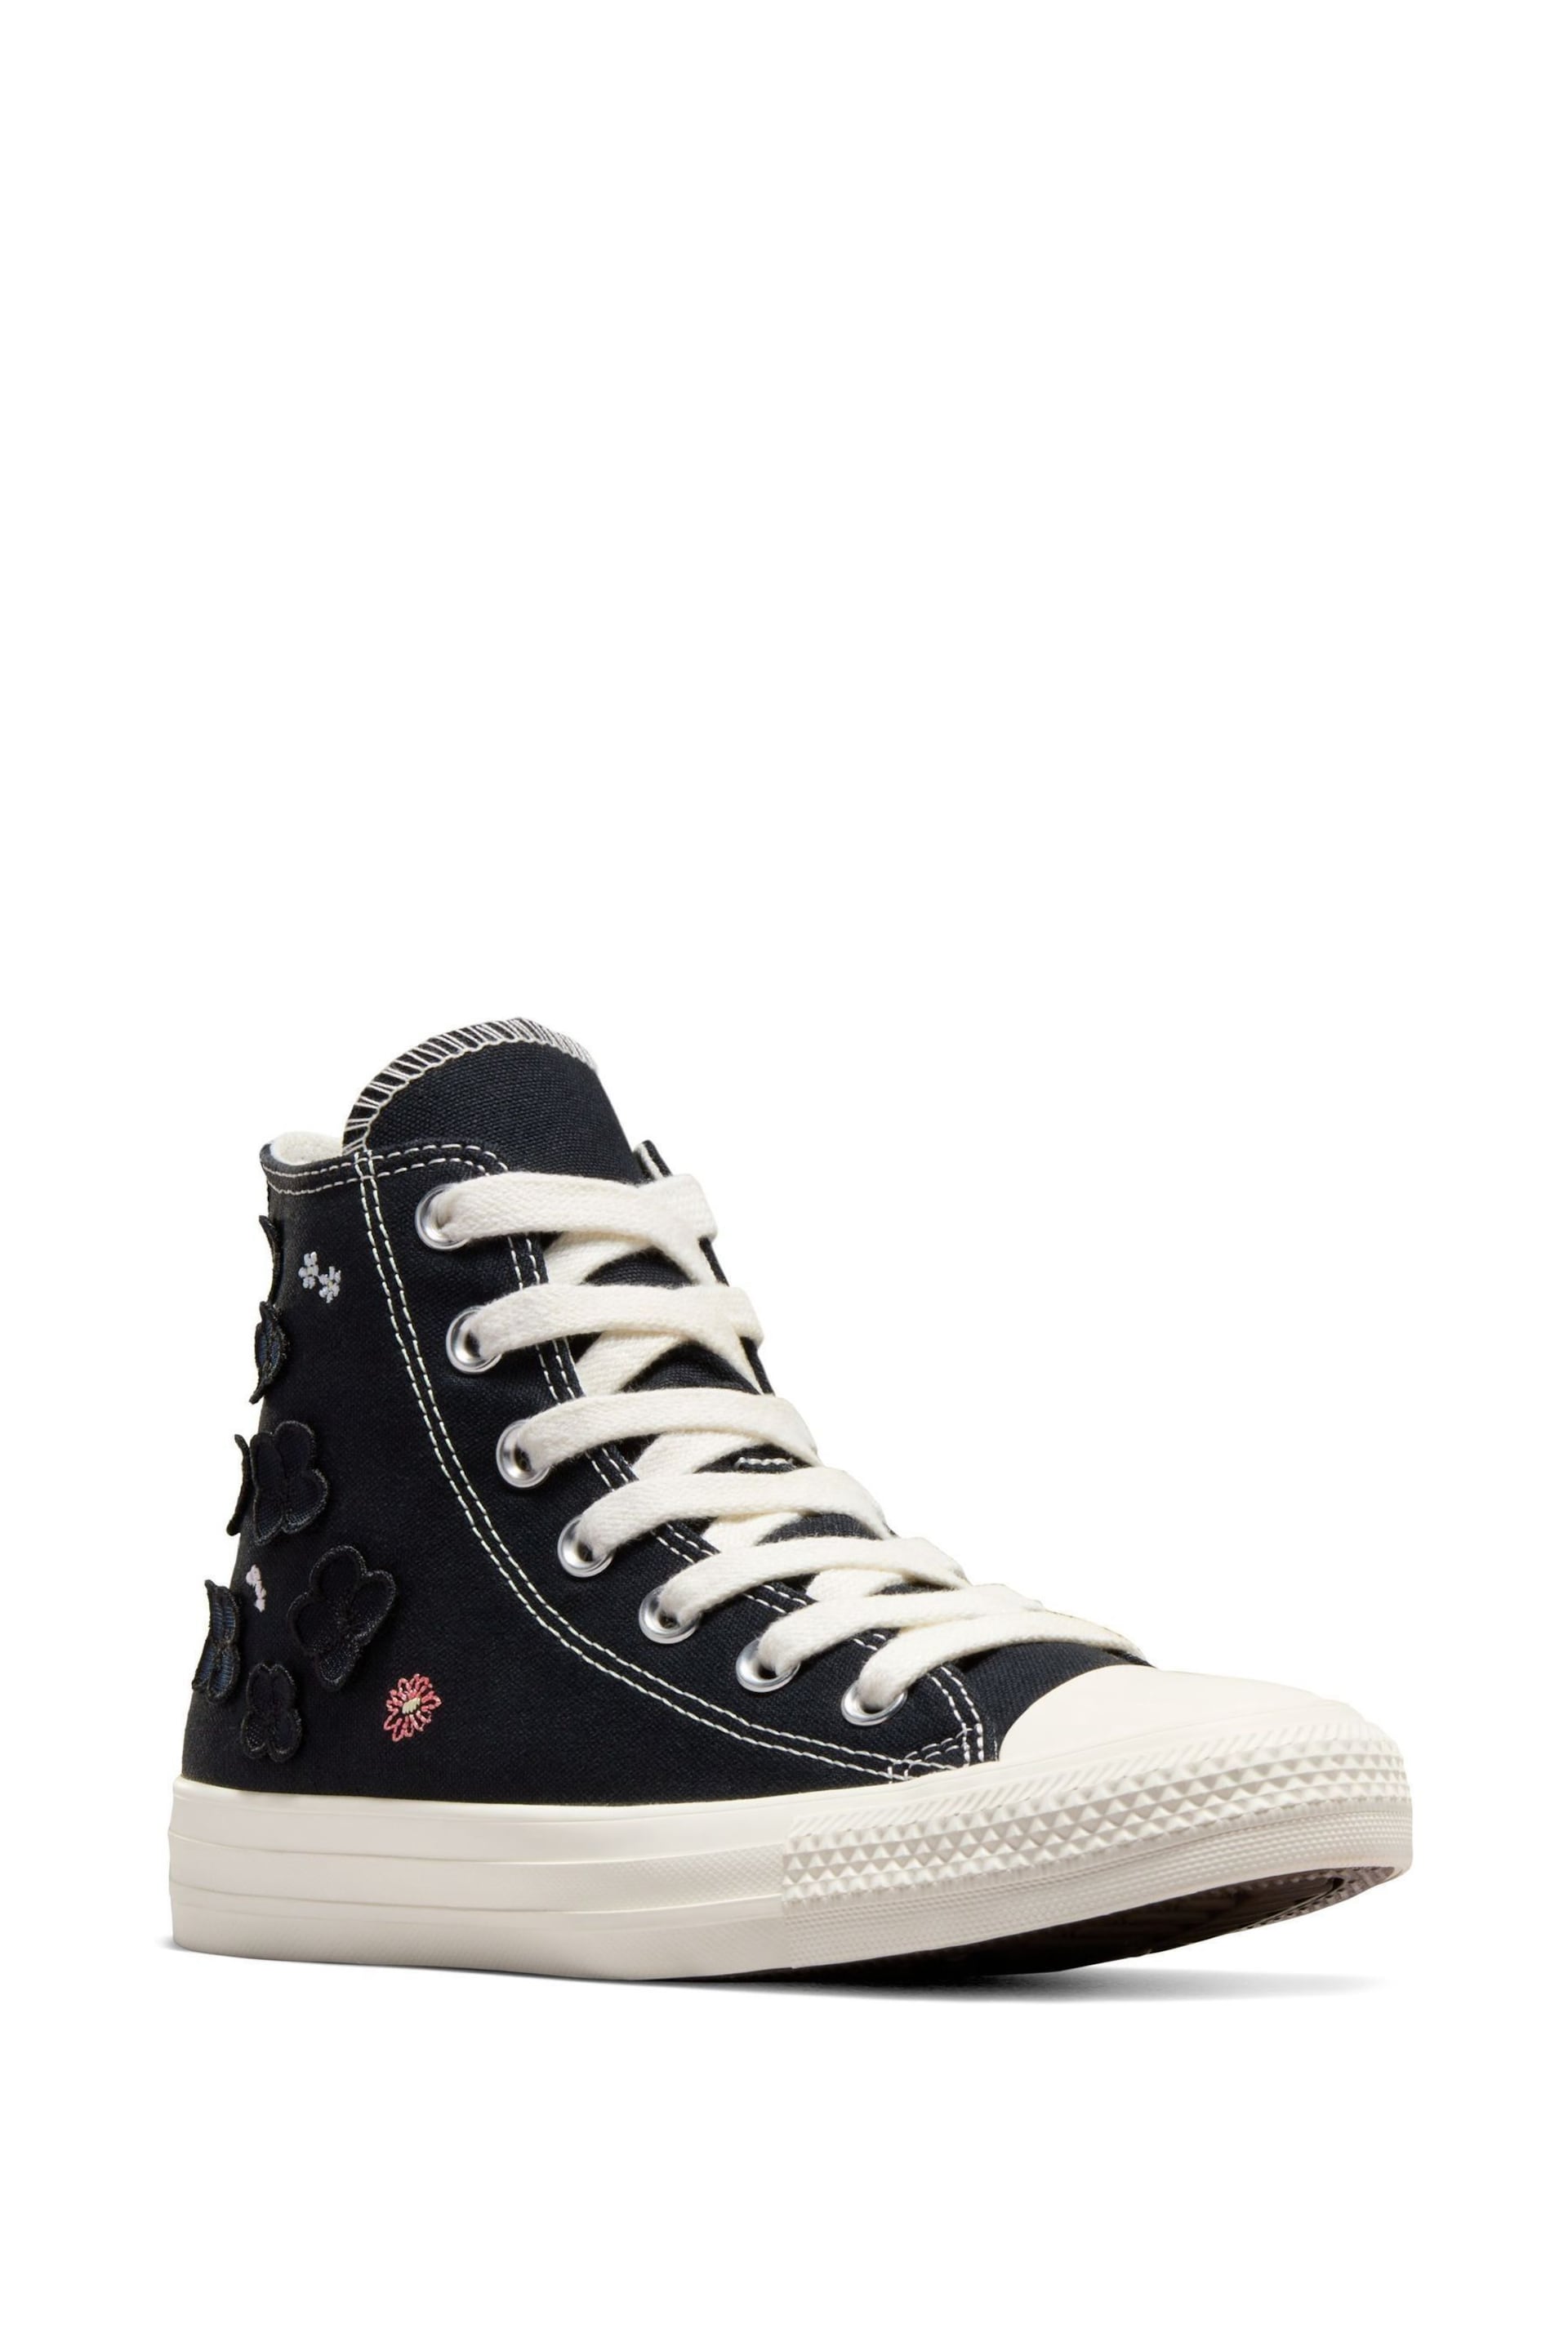 Converse Black Floral Embroidered High Top Trainers - Image 5 of 13